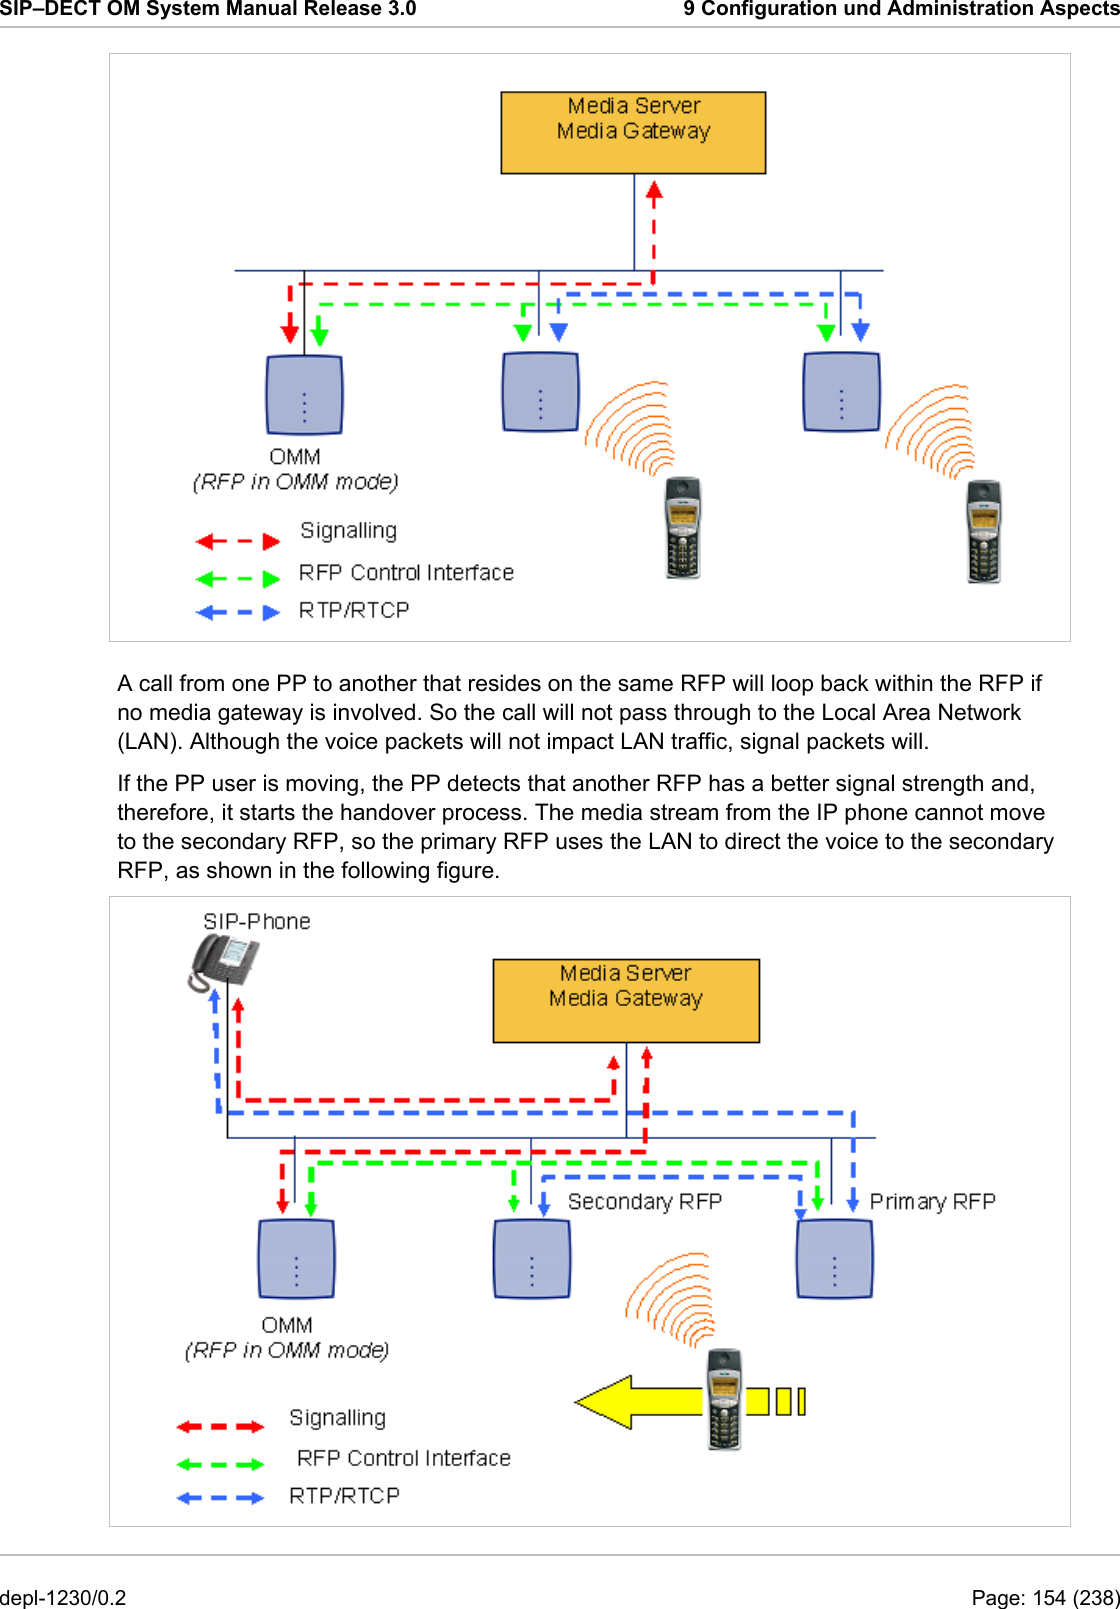 SIP–DECT OM System Manual Release 3.0  9 Configuration und Administration Aspects  A call from one PP to another that resides on the same RFP will loop back within the RFP if no media gateway is involved. So the call will not pass through to the Local Area Network (LAN). Although the voice packets will not impact LAN traffic, signal packets will. If the PP user is moving, the PP detects that another RFP has a better signal strength and, therefore, it starts the handover process. The media stream from the IP phone cannot move to the secondary RFP, so the primary RFP uses the LAN to direct the voice to the secondary RFP, as shown in the following figure.  depl-1230/0.2  Page: 154 (238) 